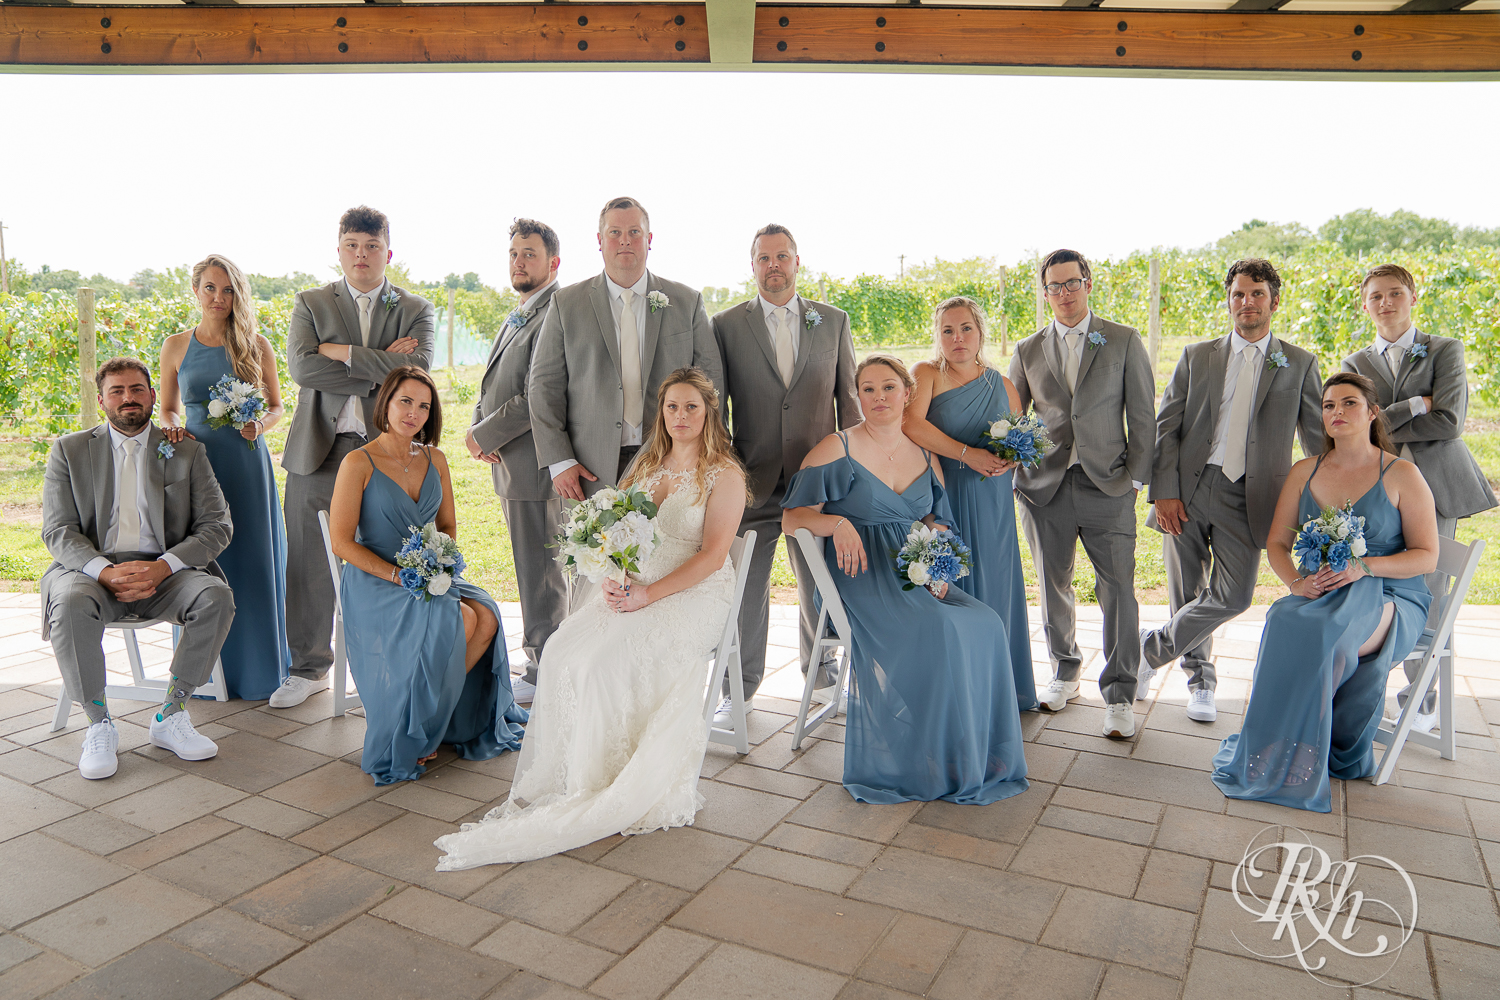 Wedding party in grey suits and blue dresses smiling at 7 Vines Vineyard in Dellwood, Minnesota.